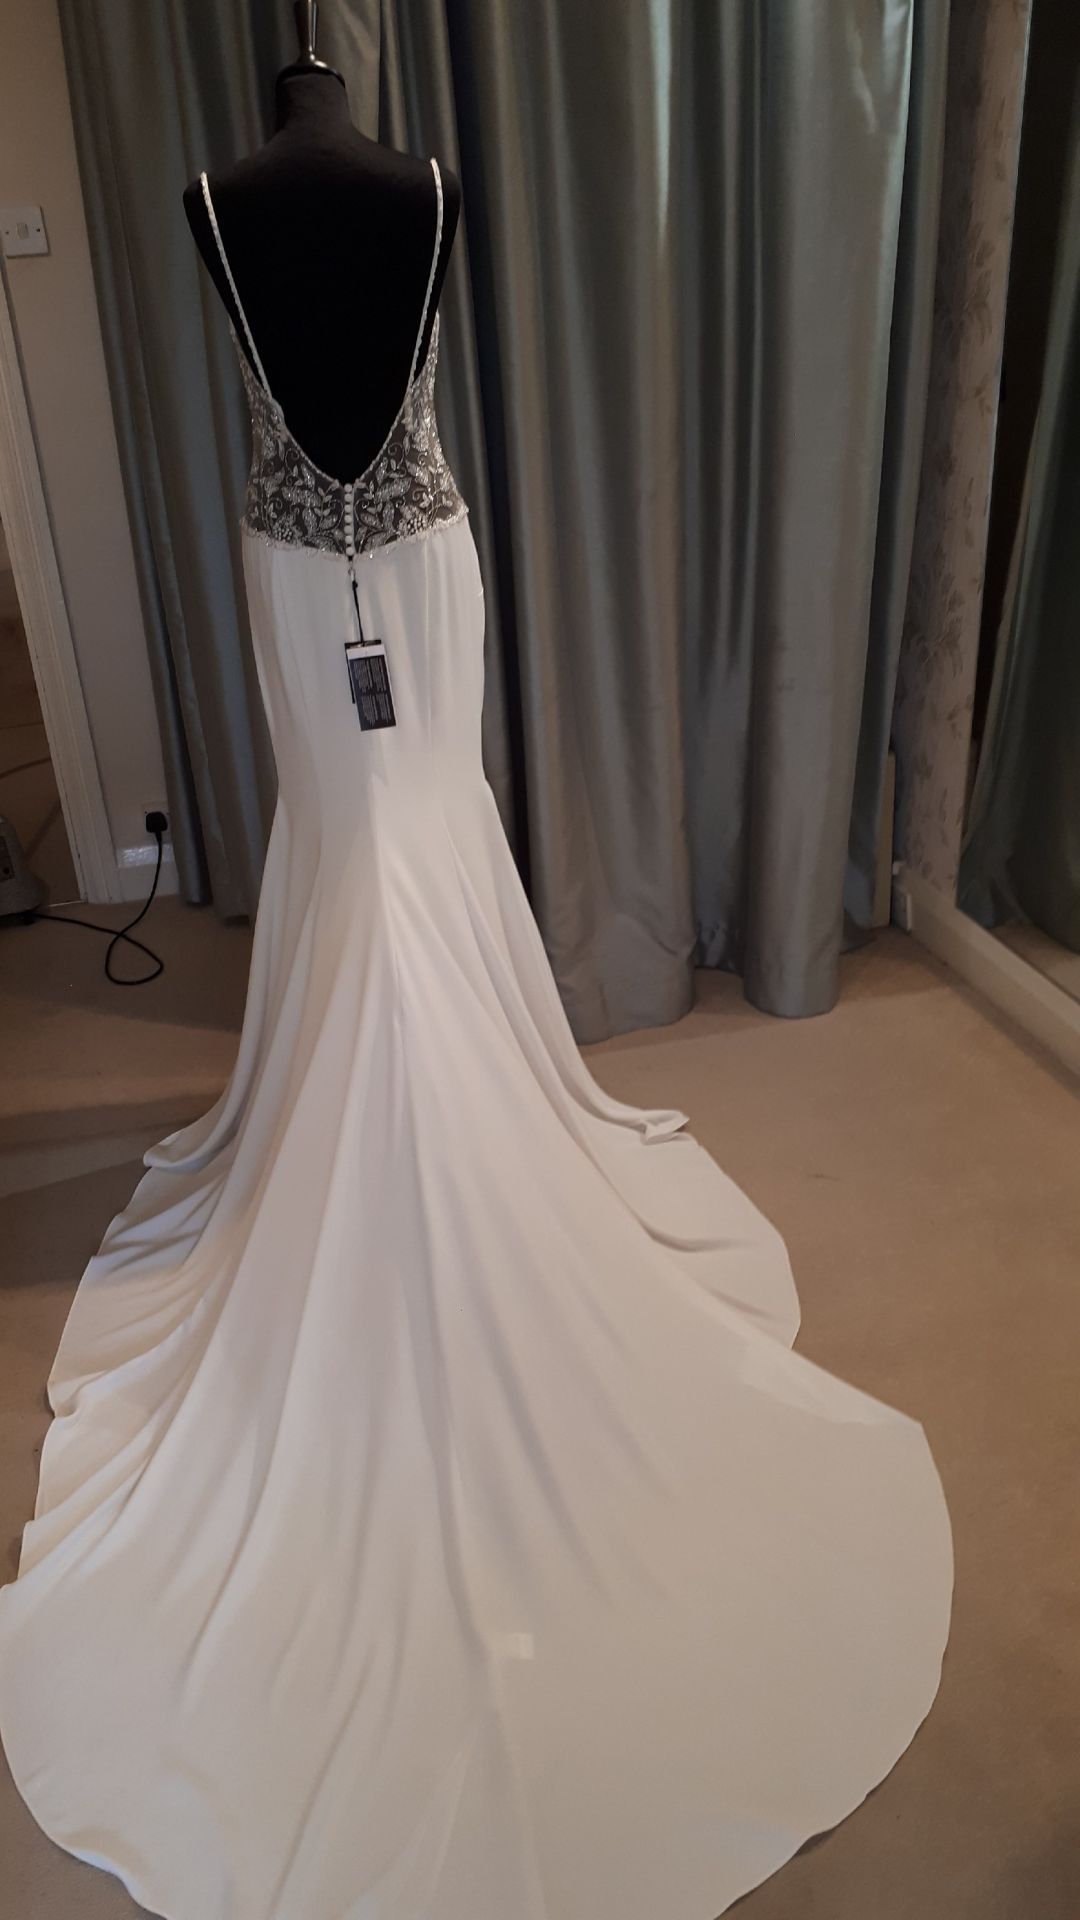 1 x Justin Alexander Fit & Flare Wedding Dress With Illusion Cutout Sides - Size 12 - RRP £1,180 - Image 5 of 5